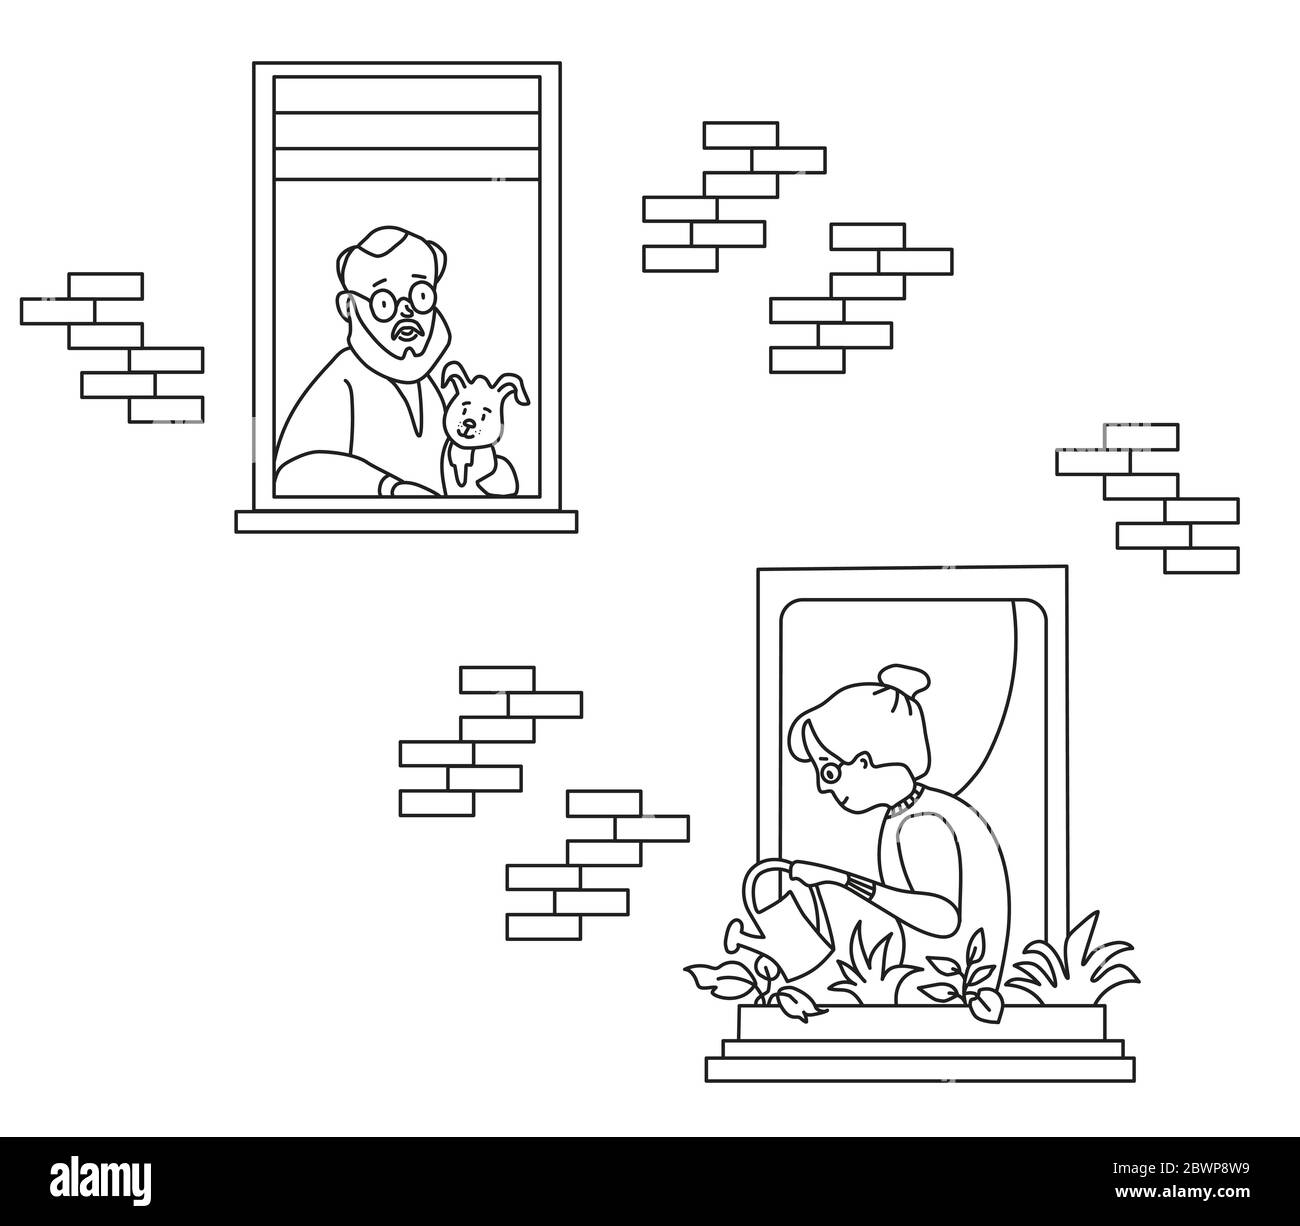 elderly couple looking for a house. windows with people neighbors. Elderly man with a dog, a woman with a watering can watering flowers. Self Stock Vector